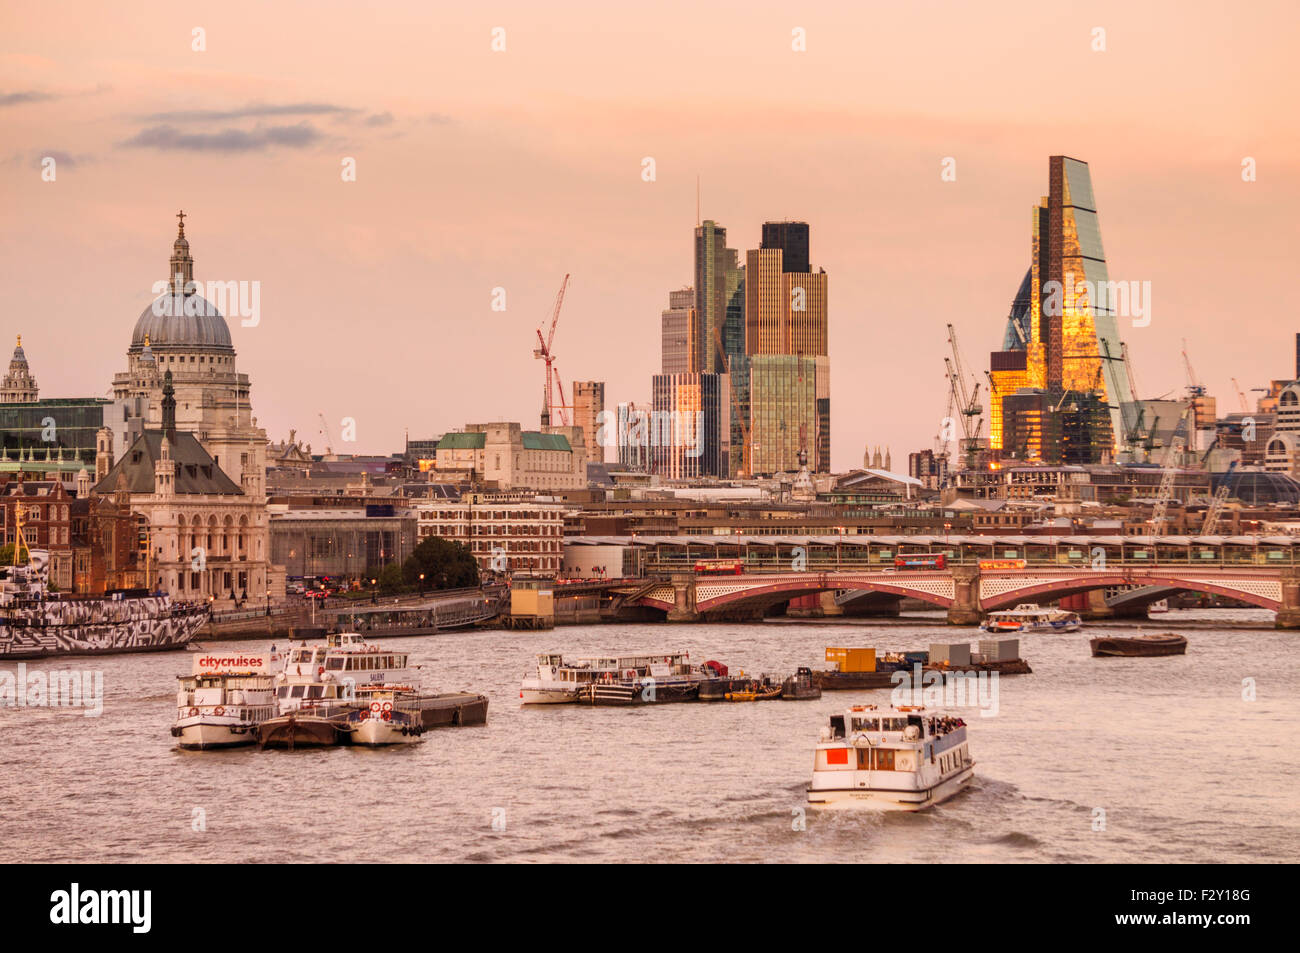 St Pauls cathedral and City of London skyline financial district at sunset River Thames City of London UK GB EU Europe Stock Photo